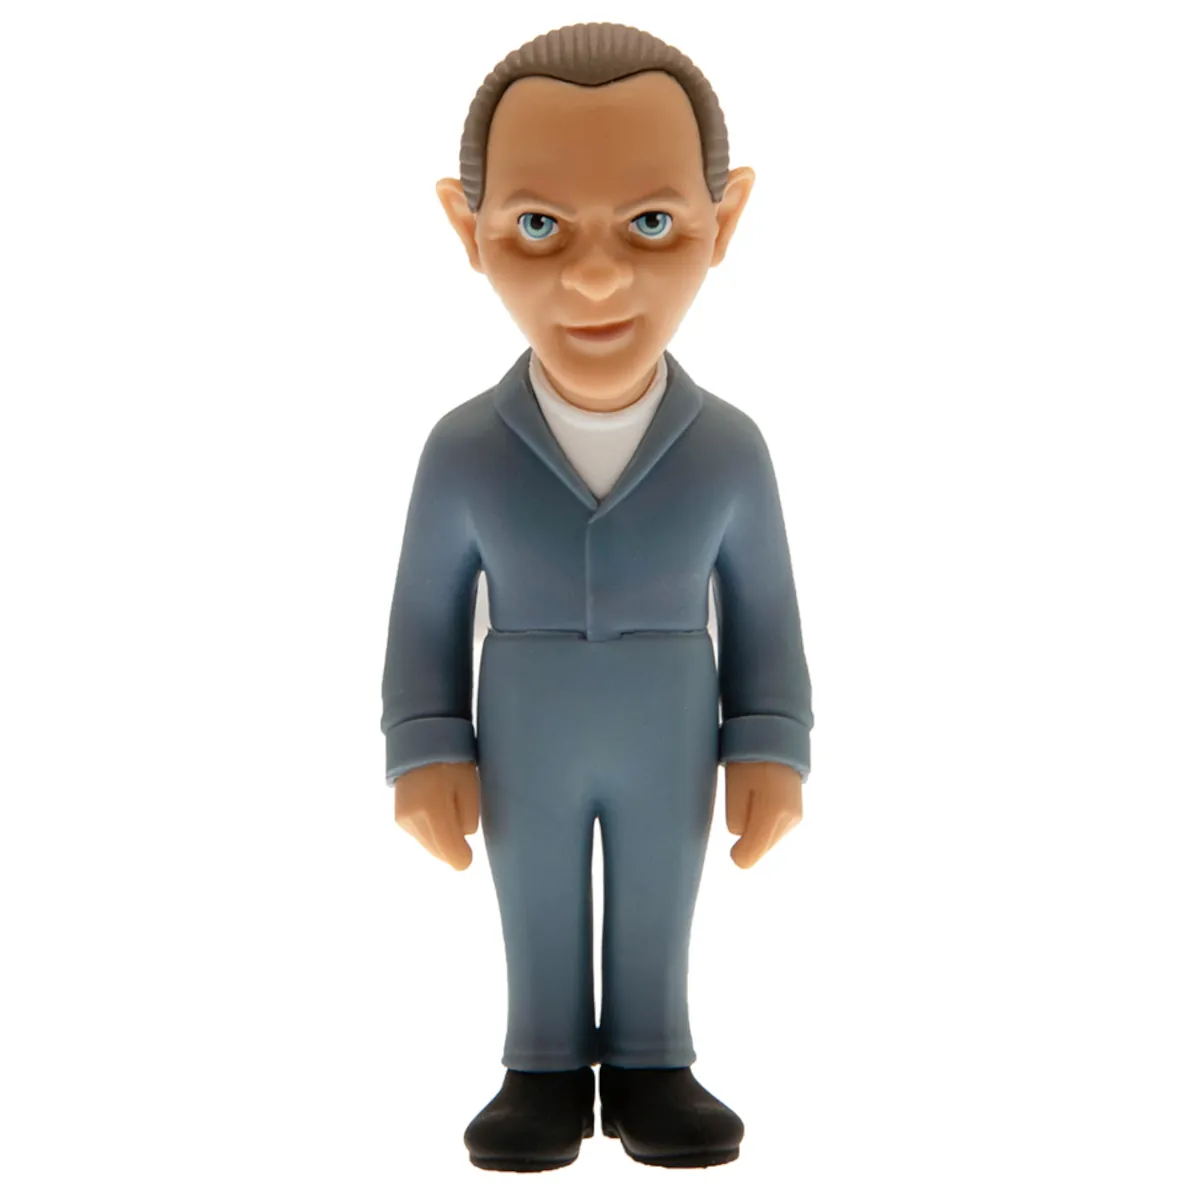 Hannibal Lector The Silence of the Lambs 12cm MINIX Collectable Figure